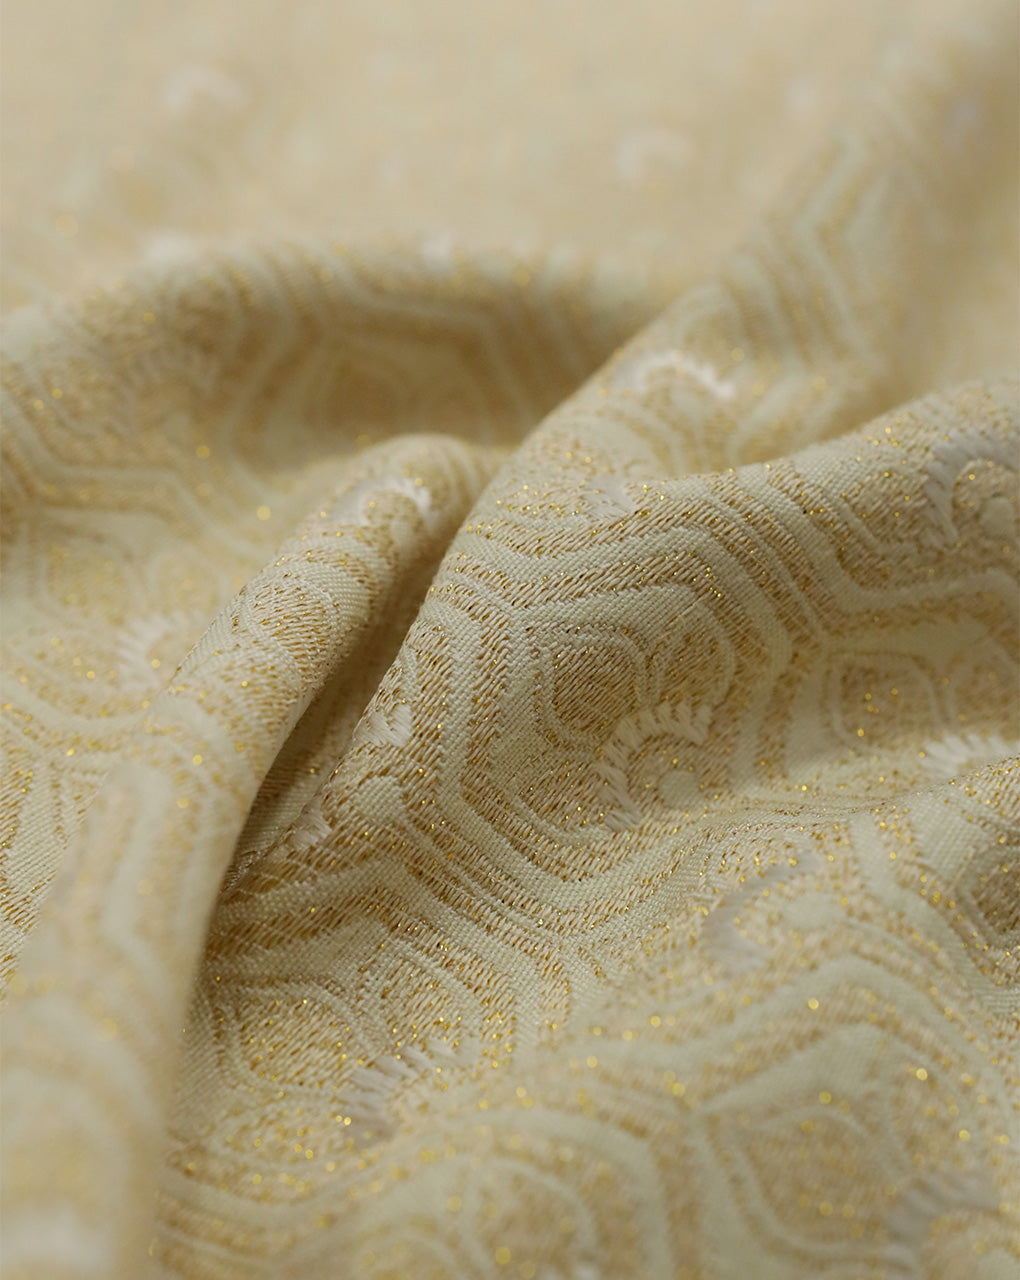 GOLDEN ABSTRACT DESIGN  POLYESTER JACQUARD FABRIC (WIDTH 58 INCHES)